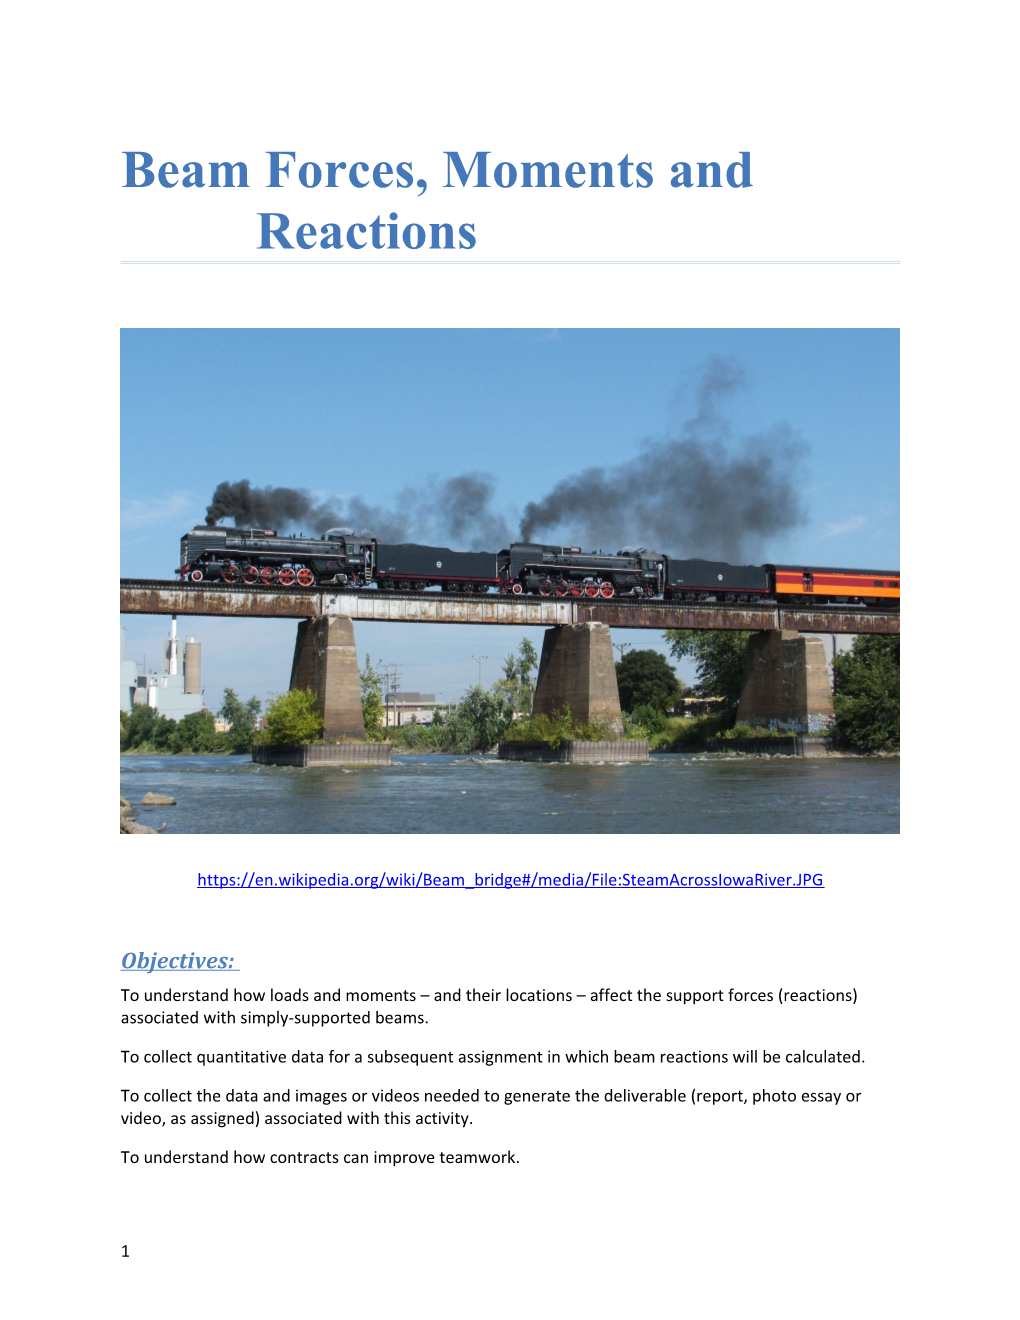 Beam Forces, Moments and Reactions